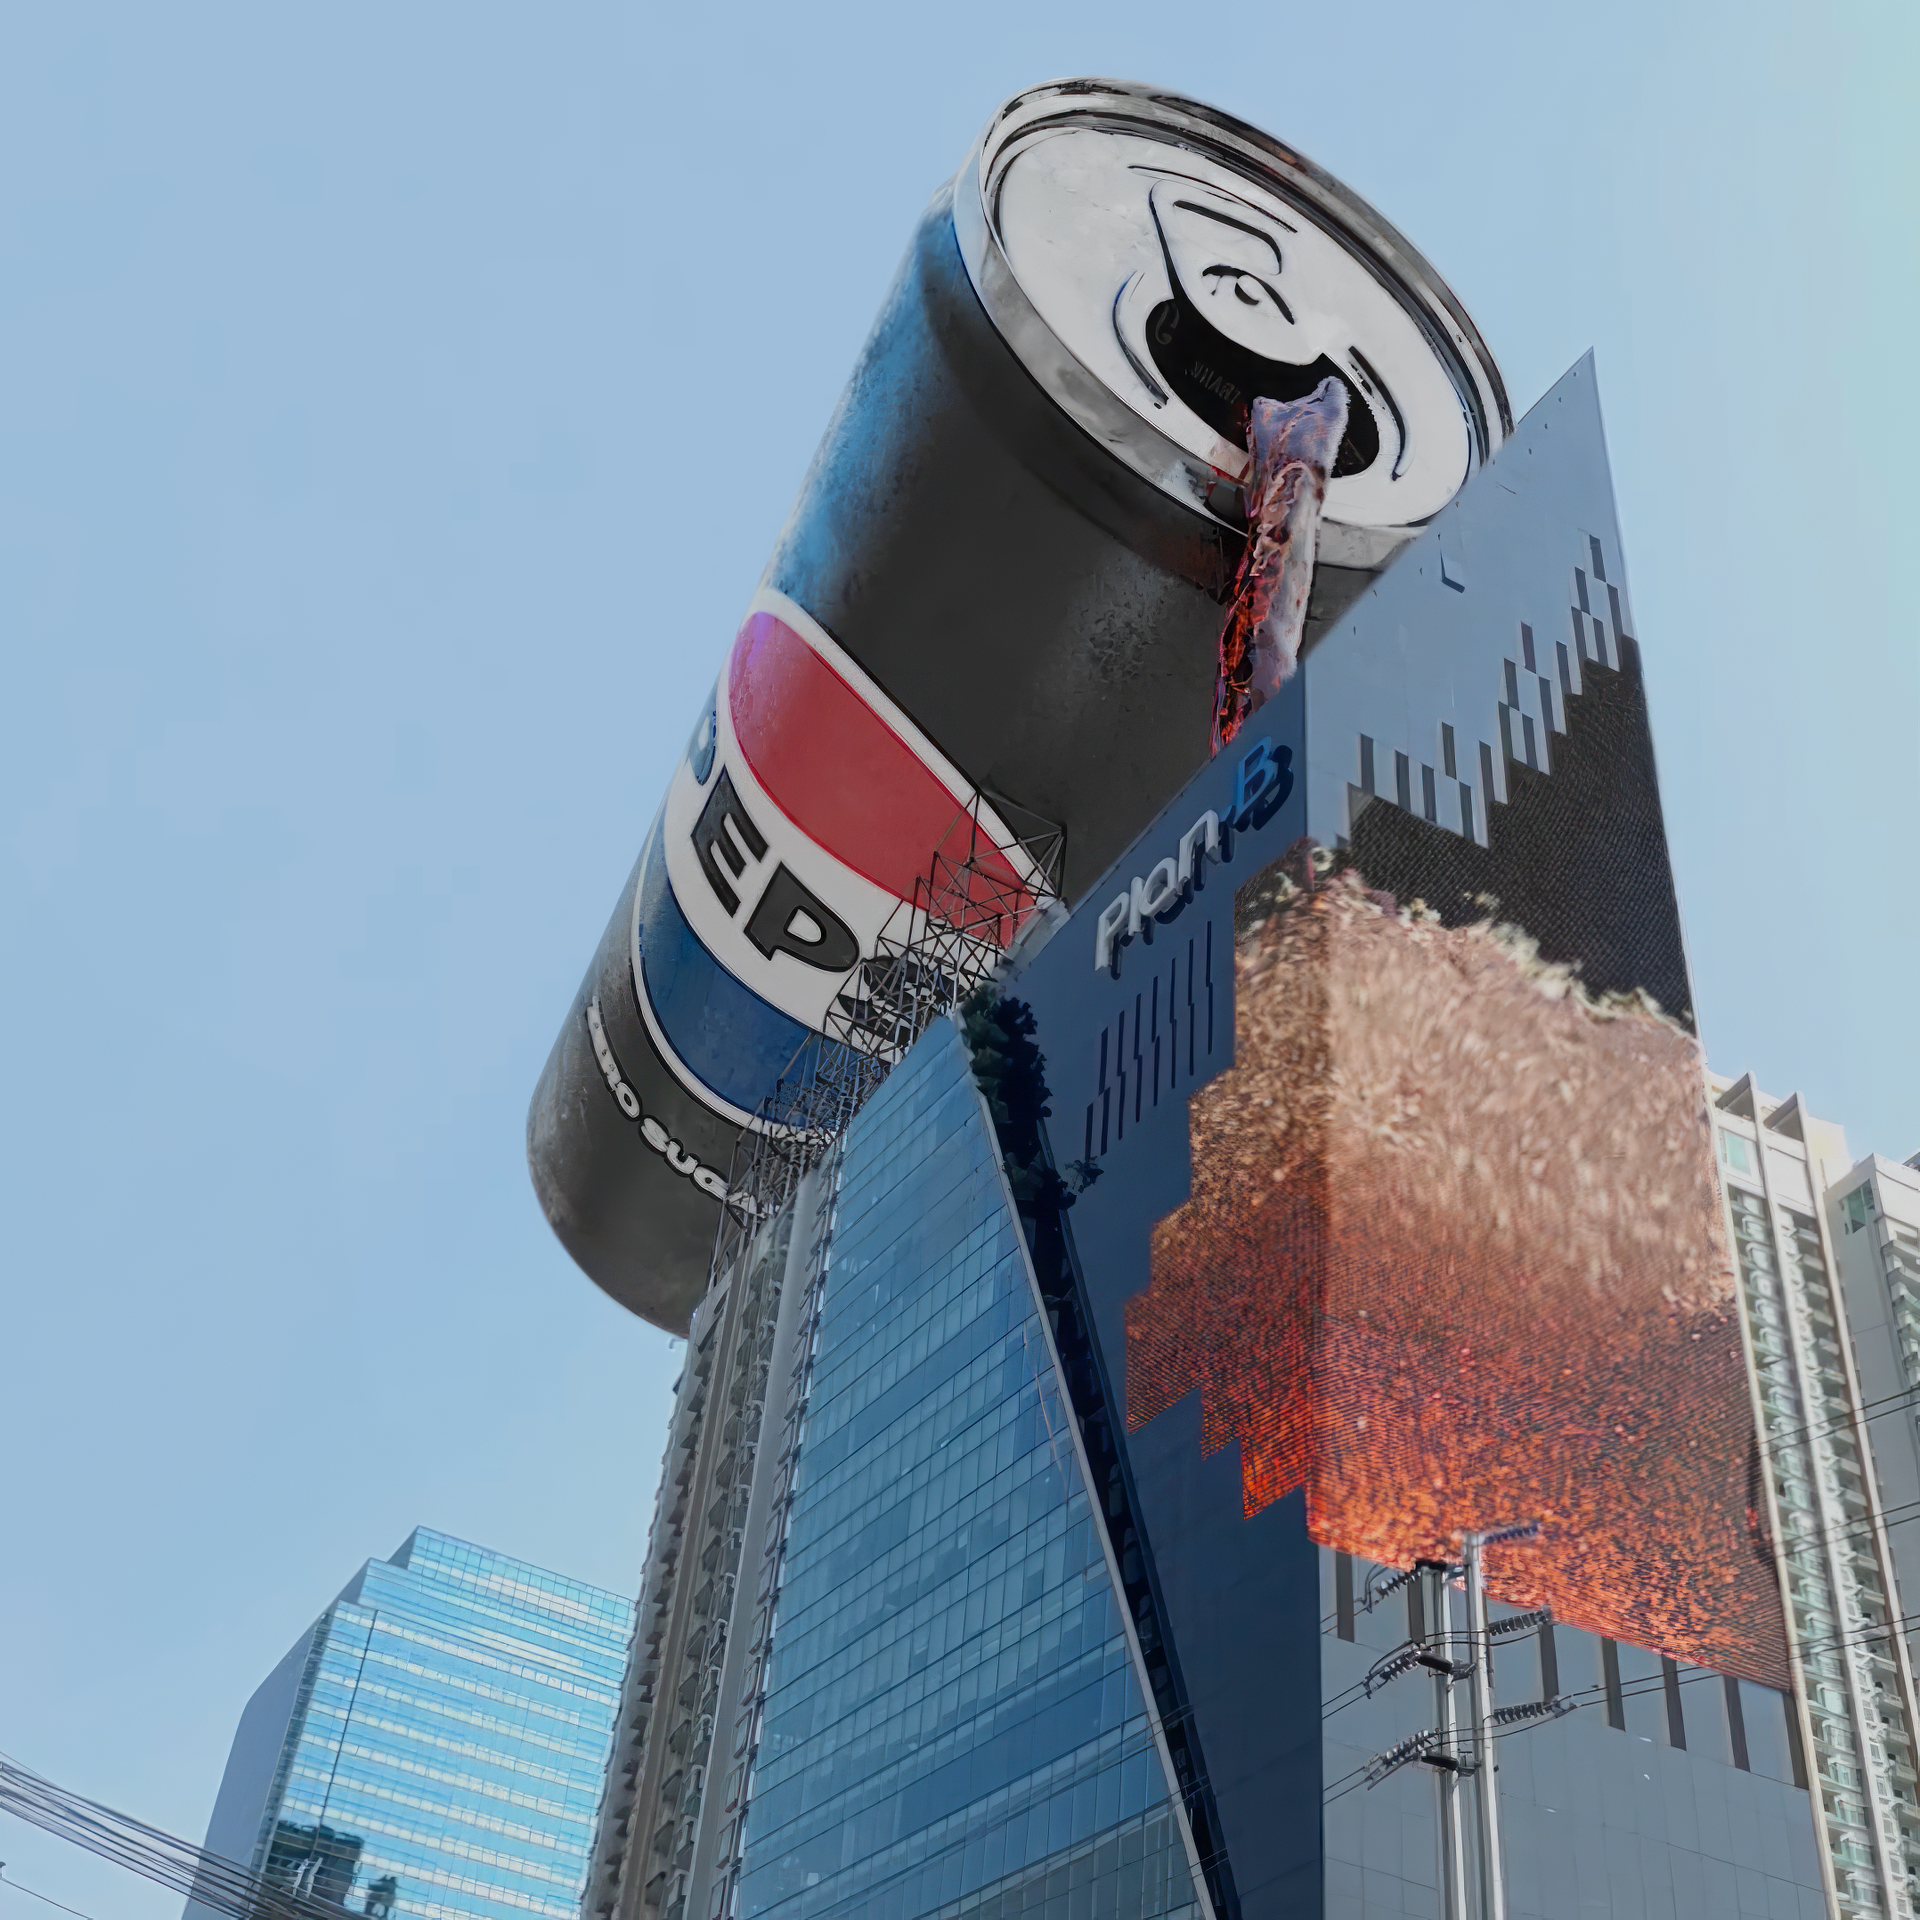 Giant Pepsi can billboard with 3D effect as if spilling over the edge of a building